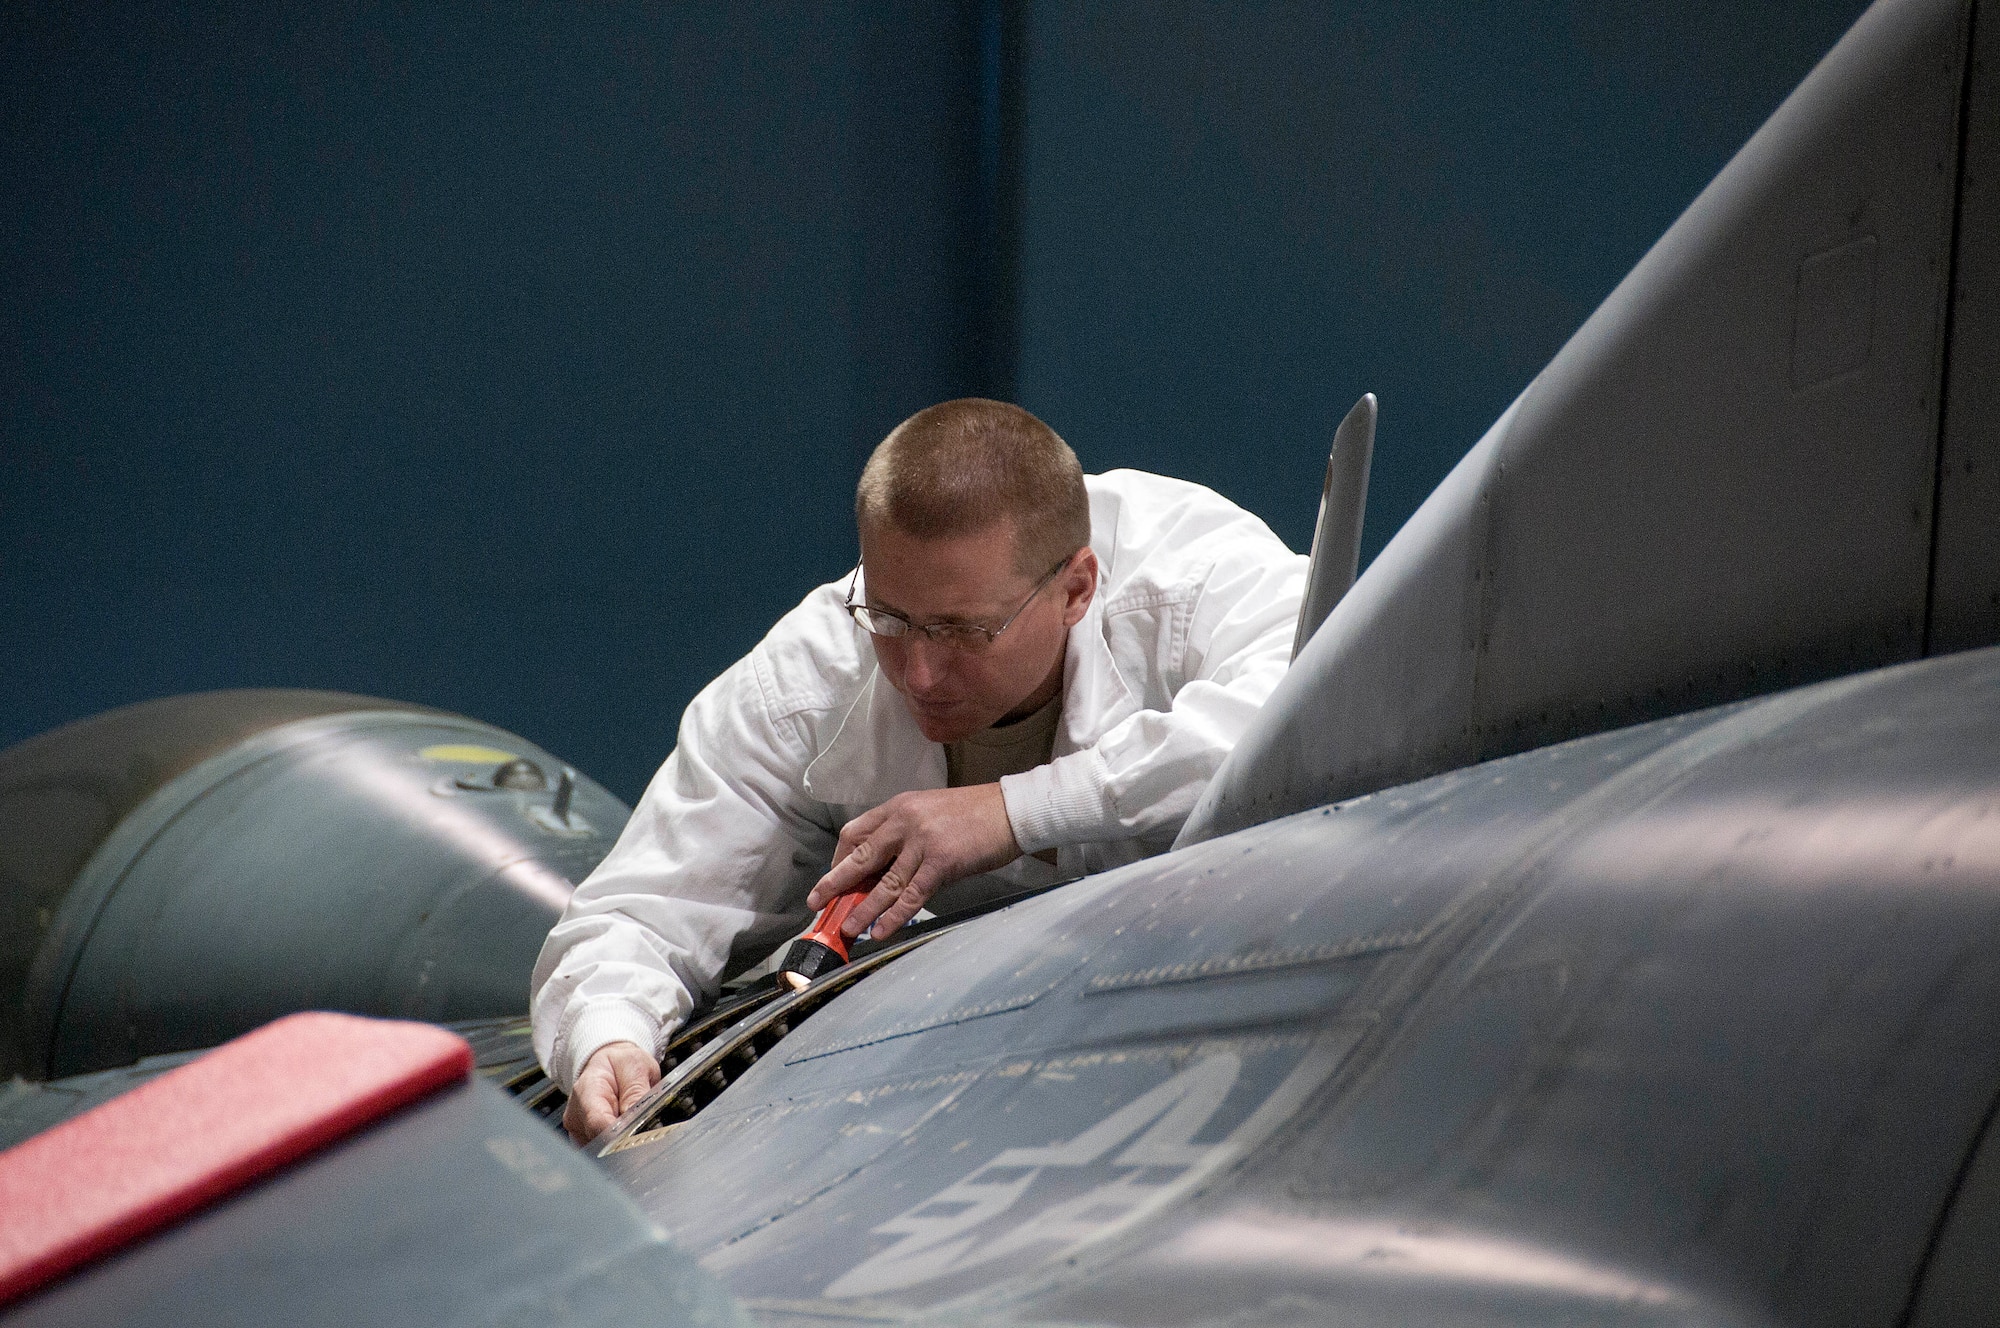 Staff Sgt. Ramey Hubbard completes an inspection after making fuel leak repairs on an F-16 Fighting Falcon at the 162nd Fighter Wing in Tucson, Ariz. Aircraft maintainers like Hubbard are embracing Maintenance Resource Management at an increasing rate to reduce the human factor in preventable mishaps. Under MRM, all risks are assessed before an Airman picks up his tools and any maintainer, regardless of rank, can halt operations if a danger is perceived. (U.S. Air Force photo/Tech. Sgt. Hollie Hansen)